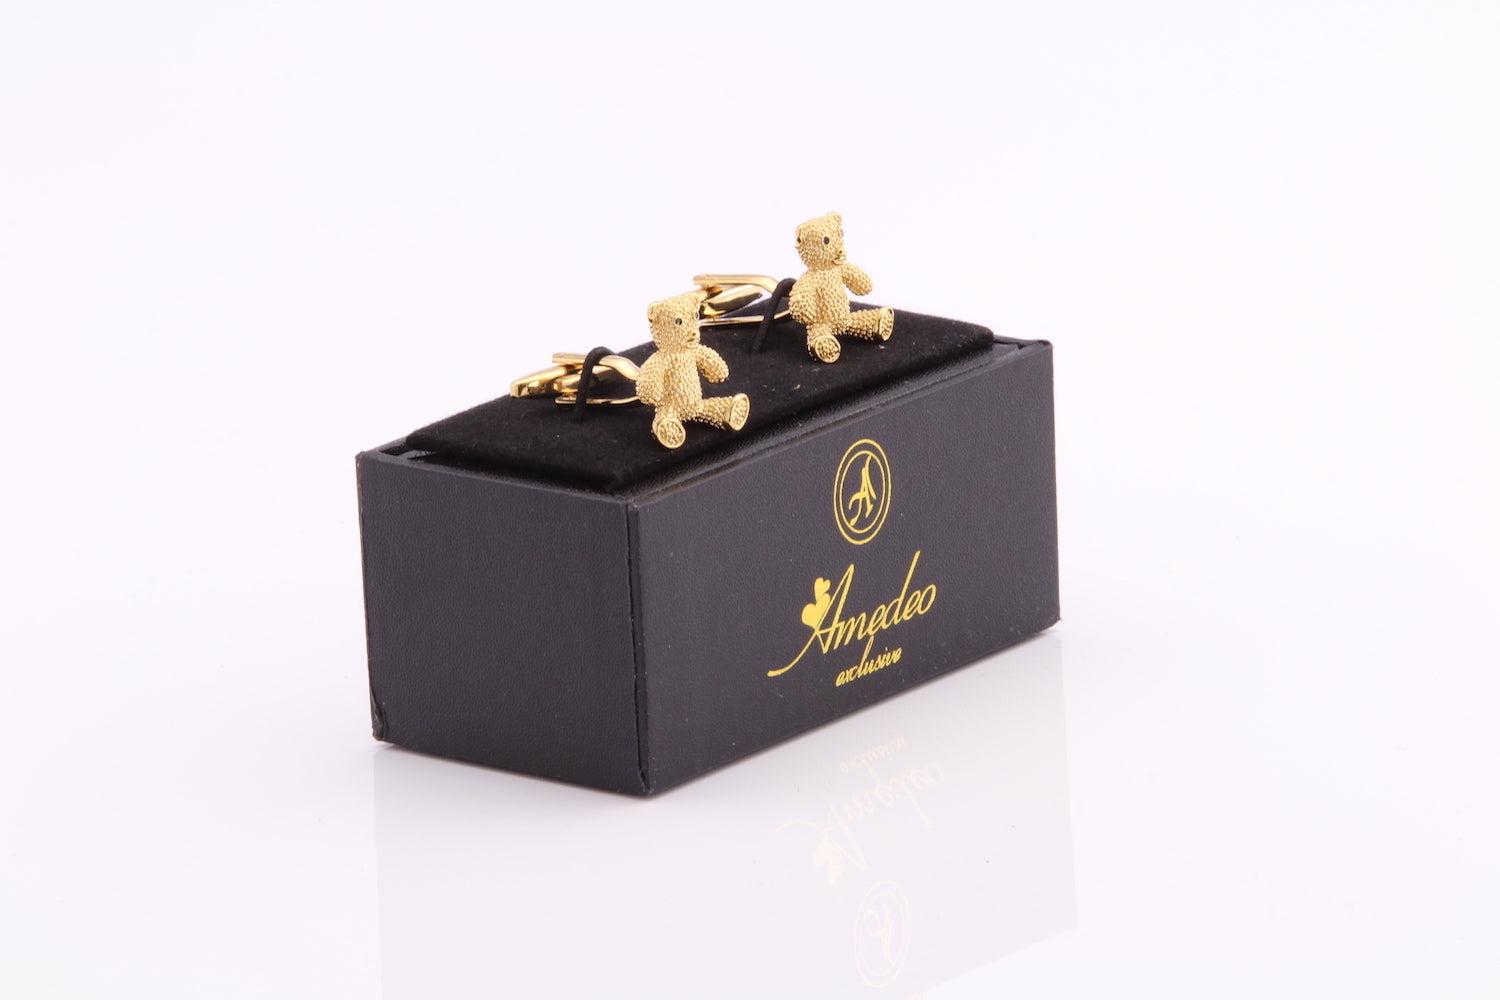 Mens Stainless Steel Gold Bears Cufflinks for Shirt with Box - Hand Crafted Perfect Gift